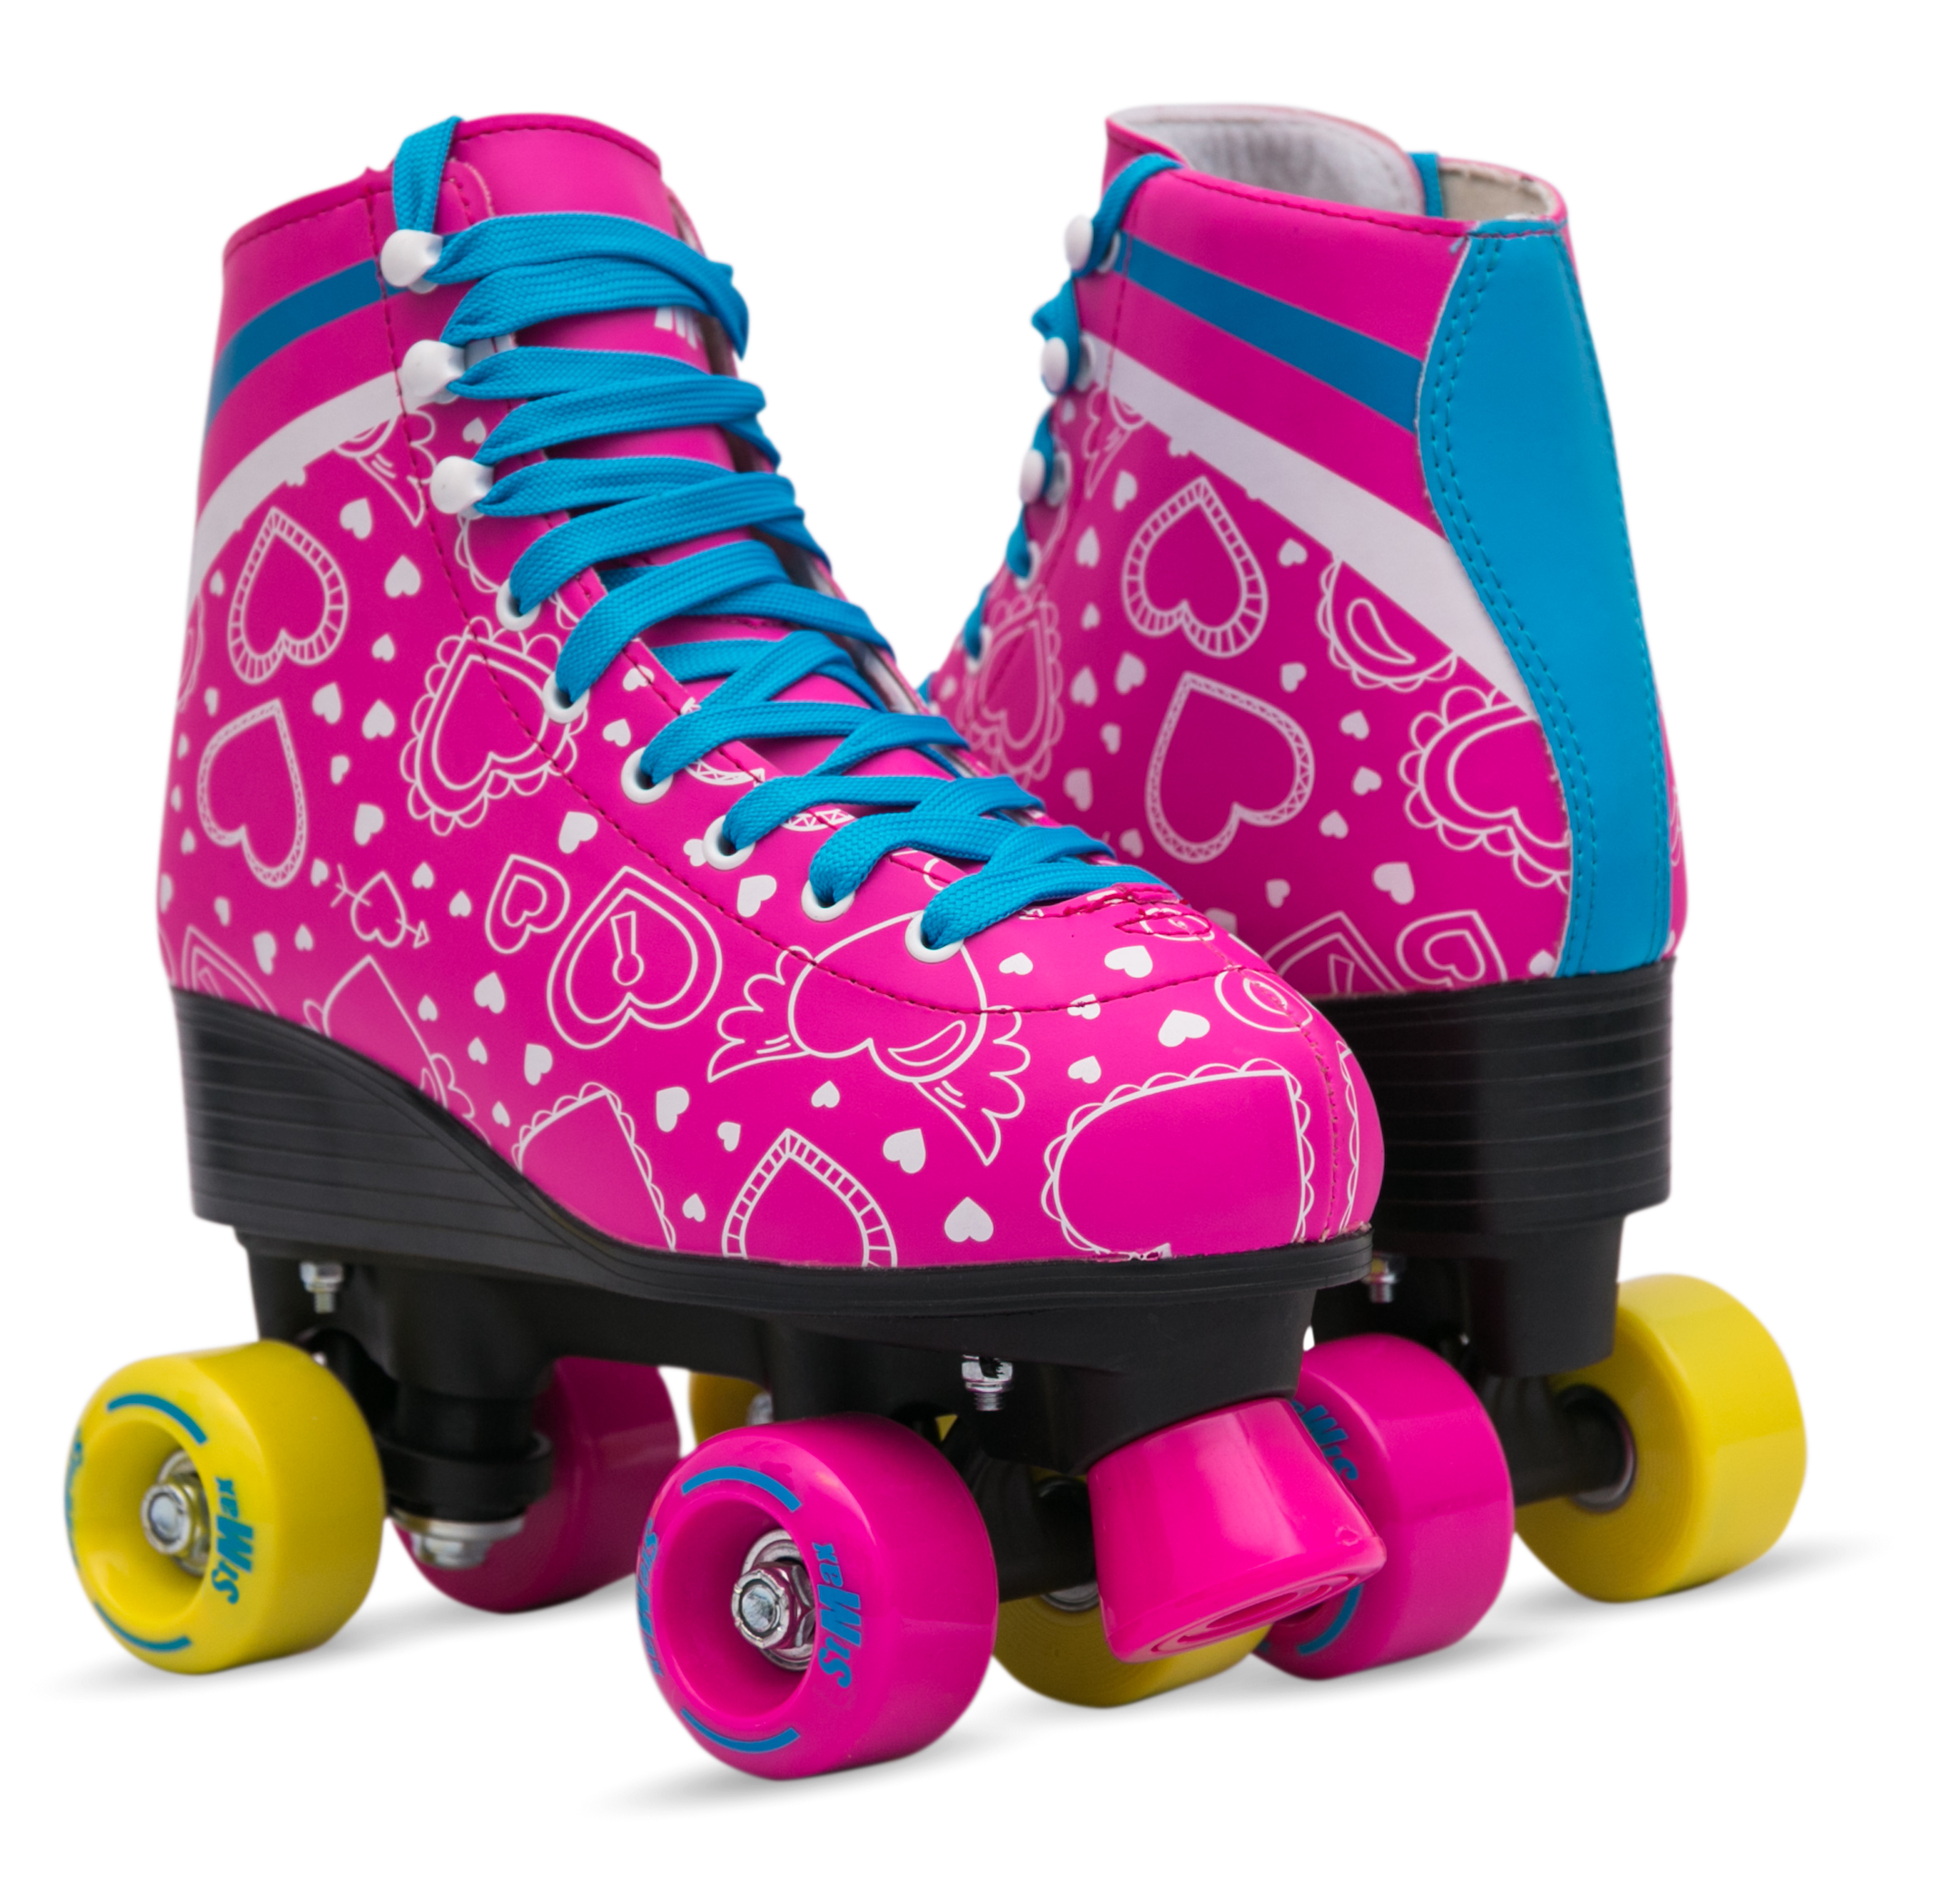 Quad Roller Skates for Girls and Boys Size S M L Yuoth Outdoor Indoor Pink Blue 